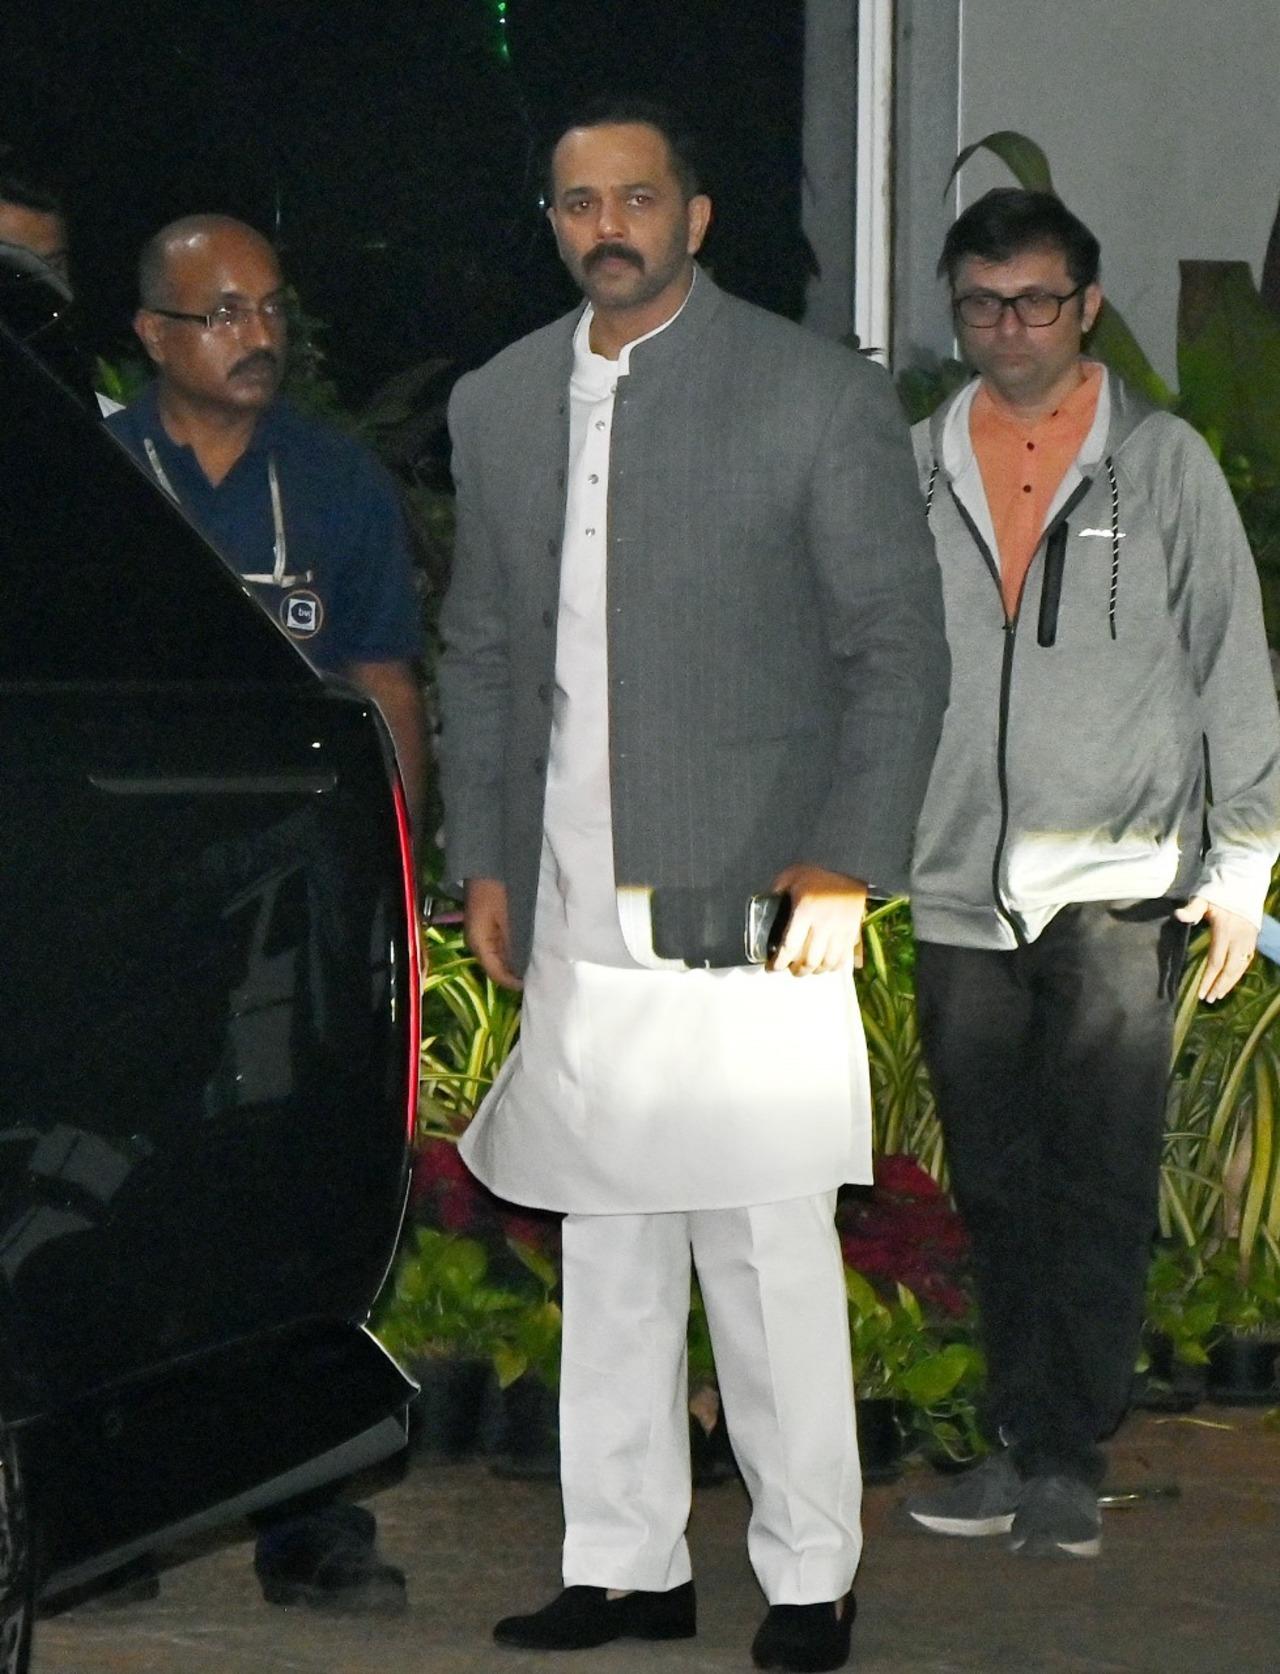 Filmmaker Rohit Shetty was seen dressed in a white kurta-pajama and grey coat over it